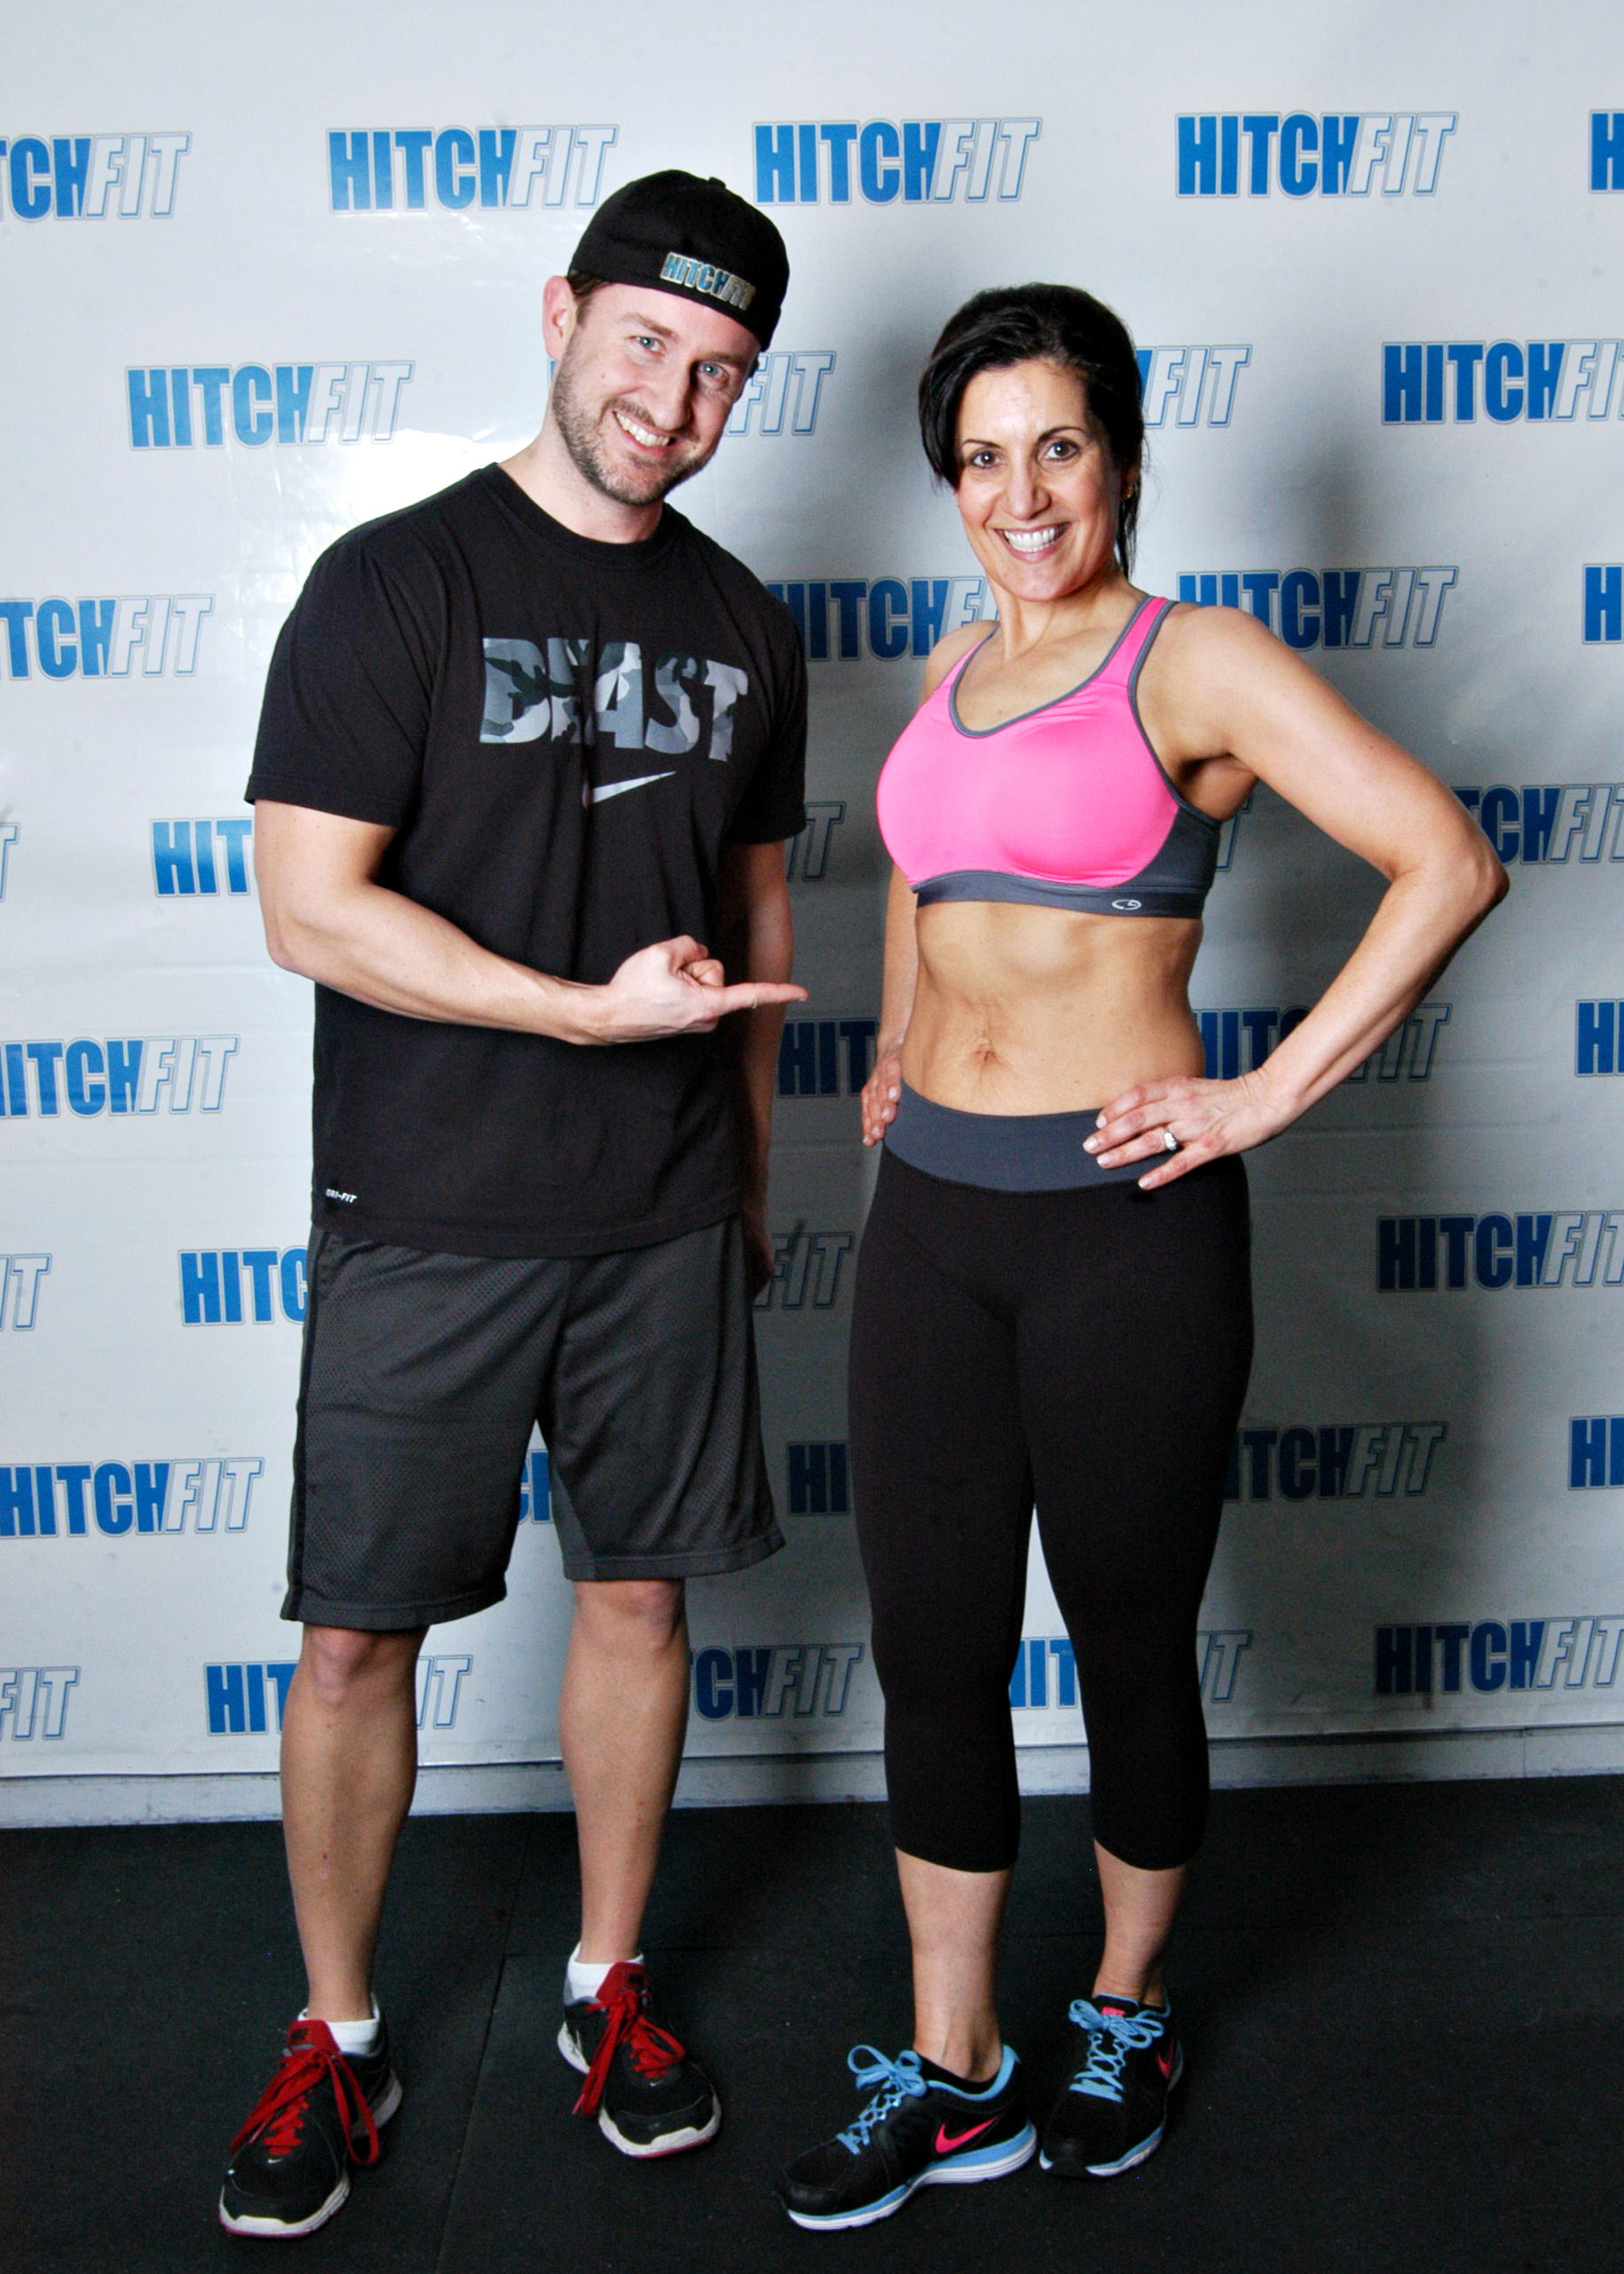 50 and Fit for the wedding day! Rachel with Hitch Fit Gym Transformation Trainer Eric Reynolds